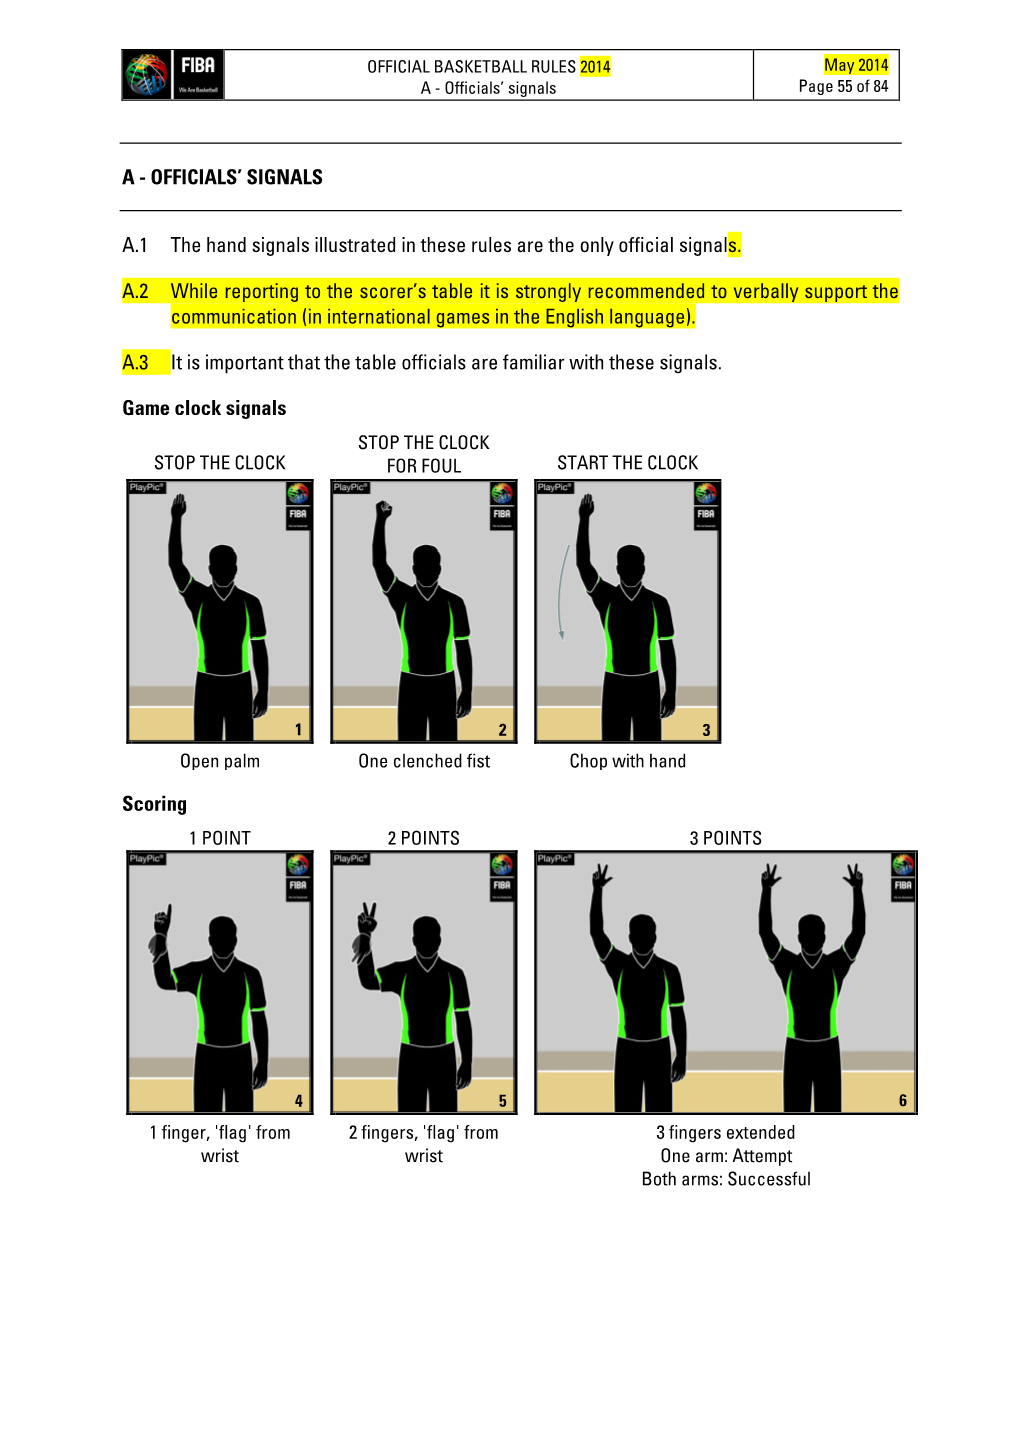 OFFICIALS' SIGNALS A.1 the Hand Signals Illustrated in These Rules Are